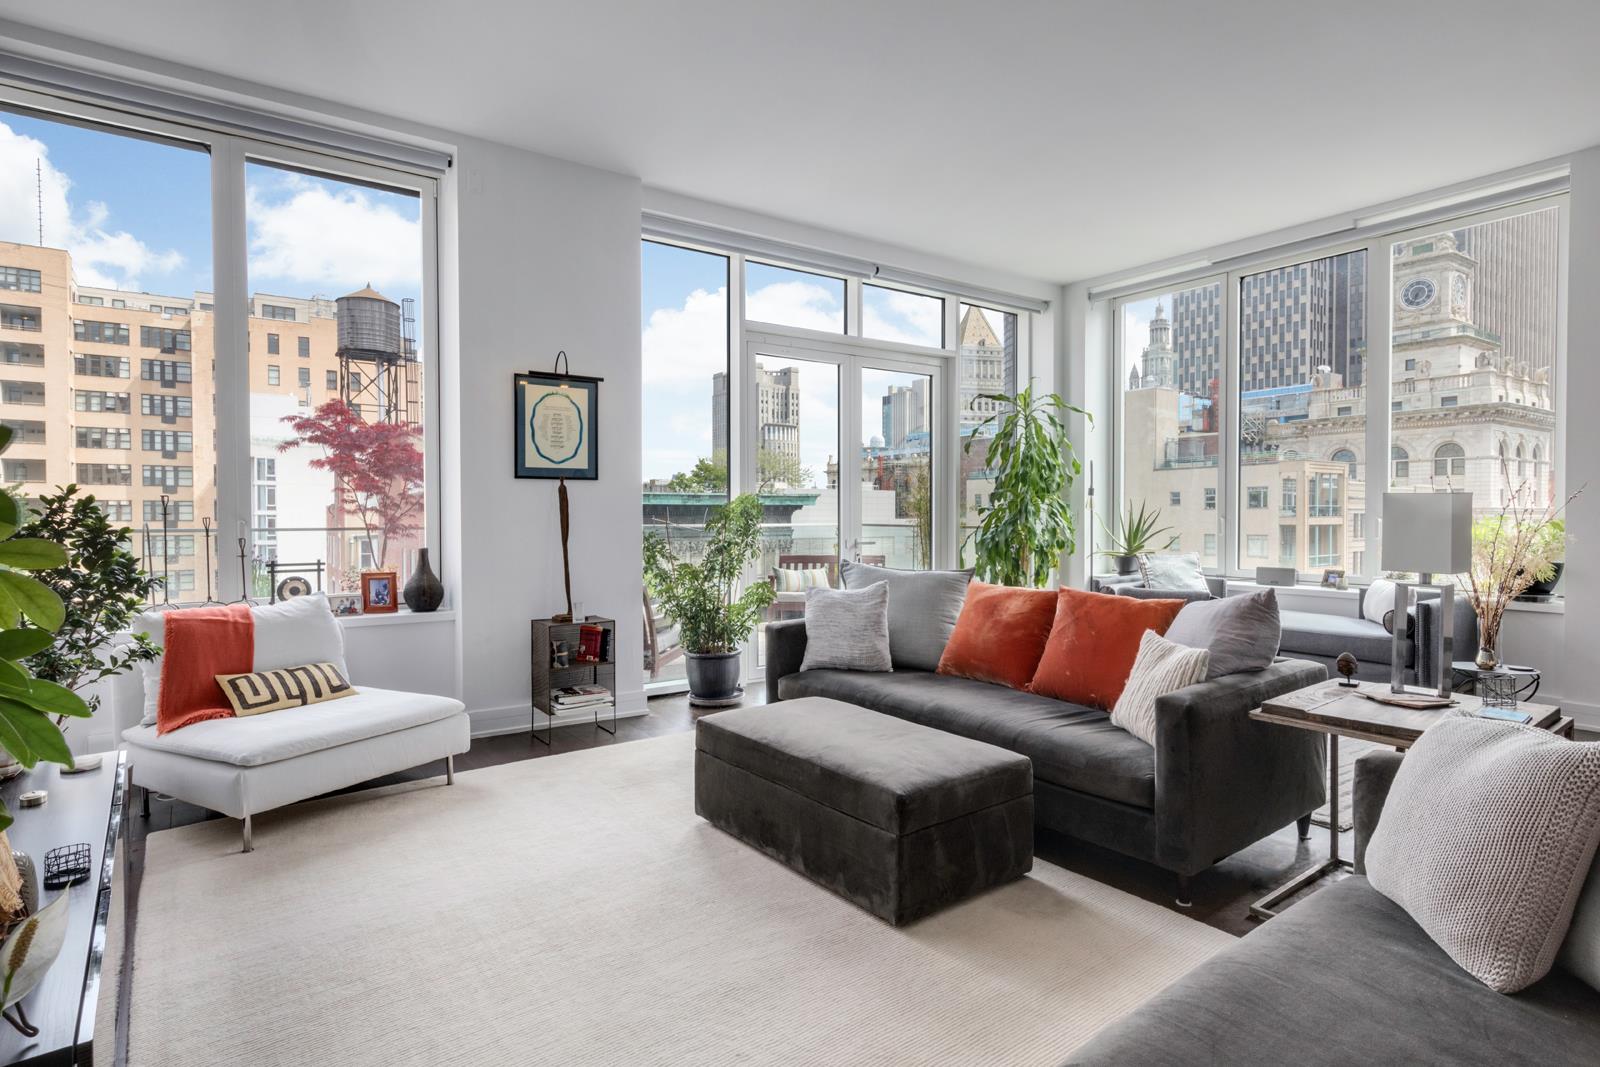 5 Franklin Place 16B, Tribeca, Downtown, NYC - 3 Bedrooms  
2.5 Bathrooms  
6 Rooms - 